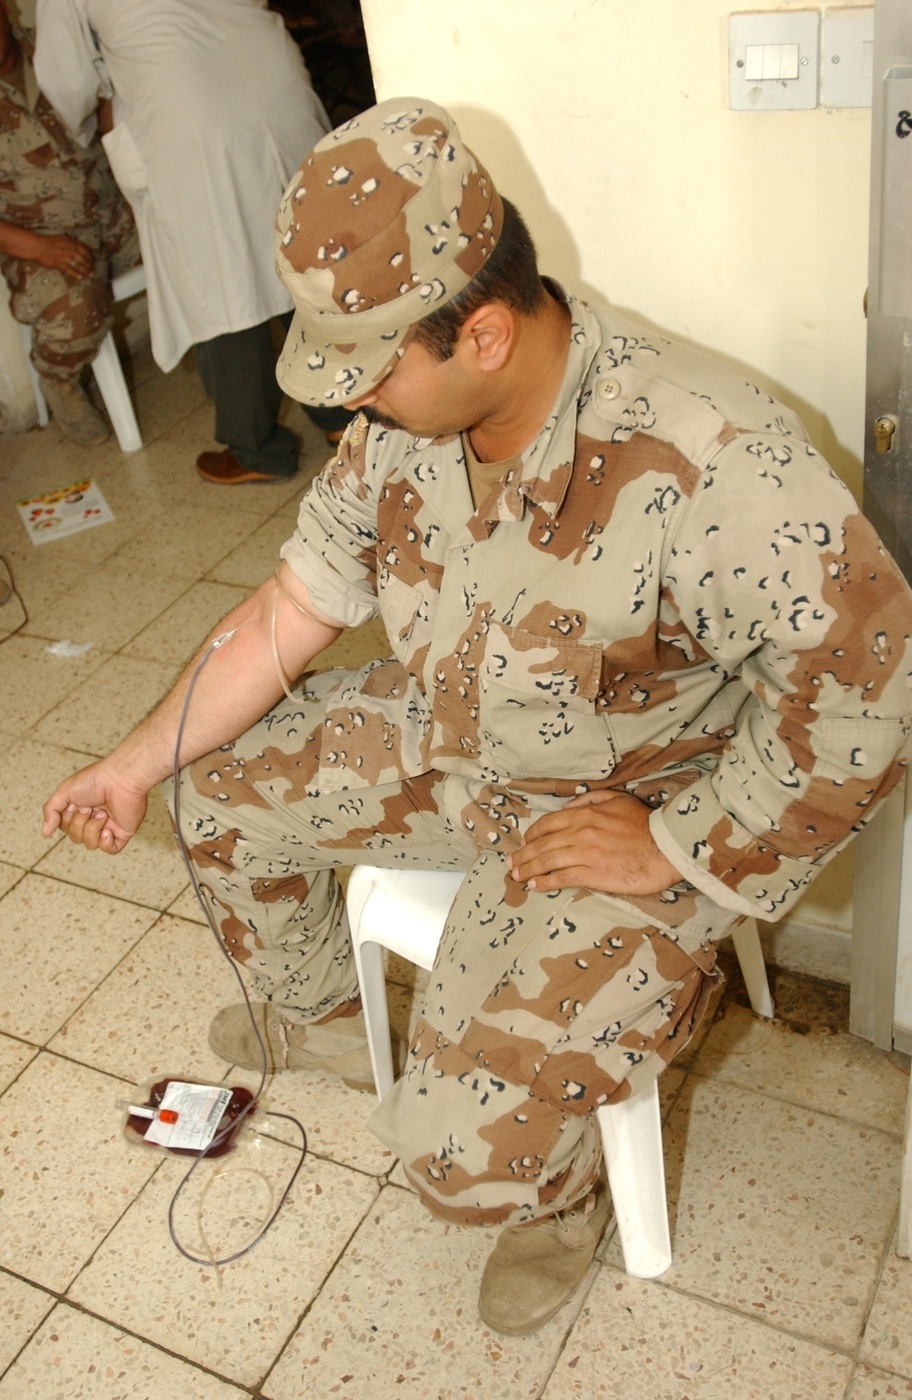 IA Soldiers Donate Blood to Help Save